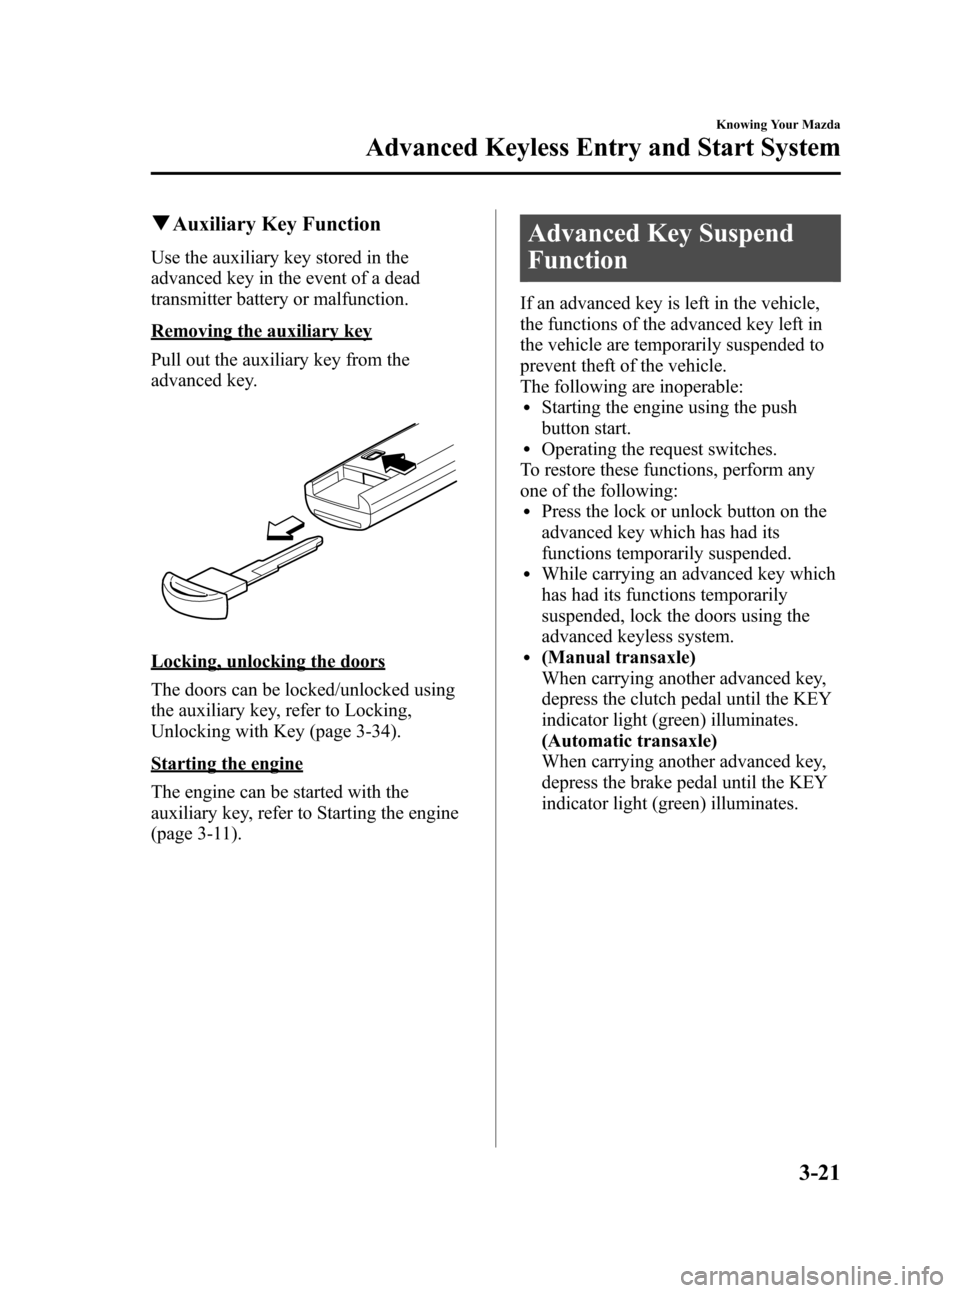 MAZDA MODEL 3 HATCHBACK 2010  Owners Manual (in English) Black plate (97,1)
qAuxiliary Key Function
Use the auxiliary key stored in the
advanced key in the event of a dead
transmitter battery or malfunction.
Removing the auxiliary key
Pull out the auxiliary